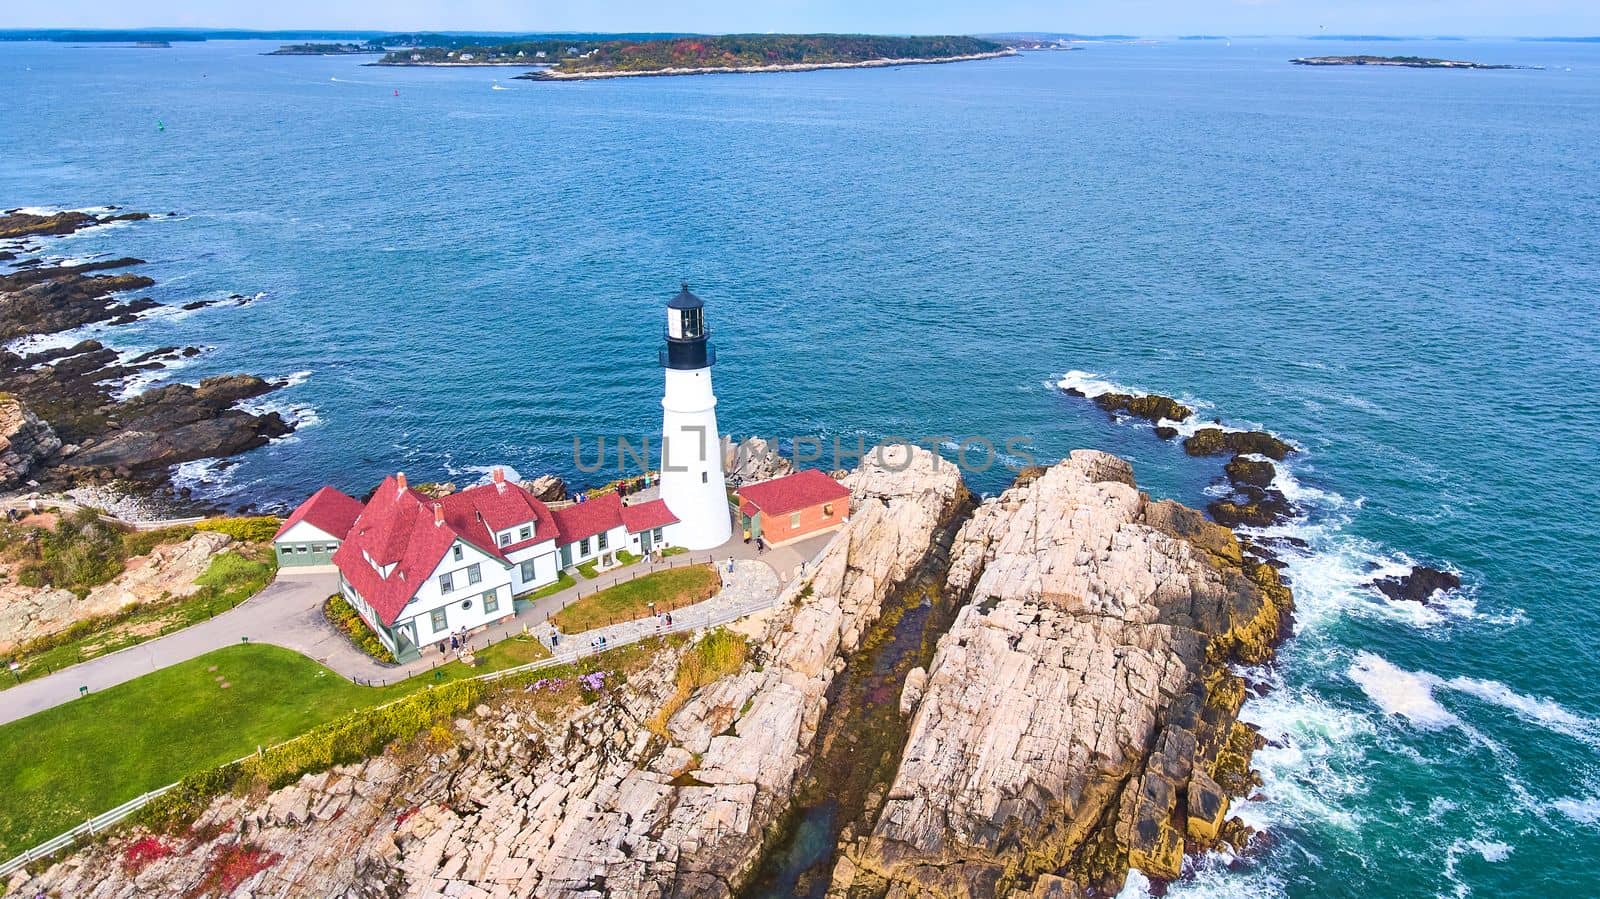 Image of Aerial overlooking amazing Portland lighthouse in Maine with rocky coasts and crashing waves